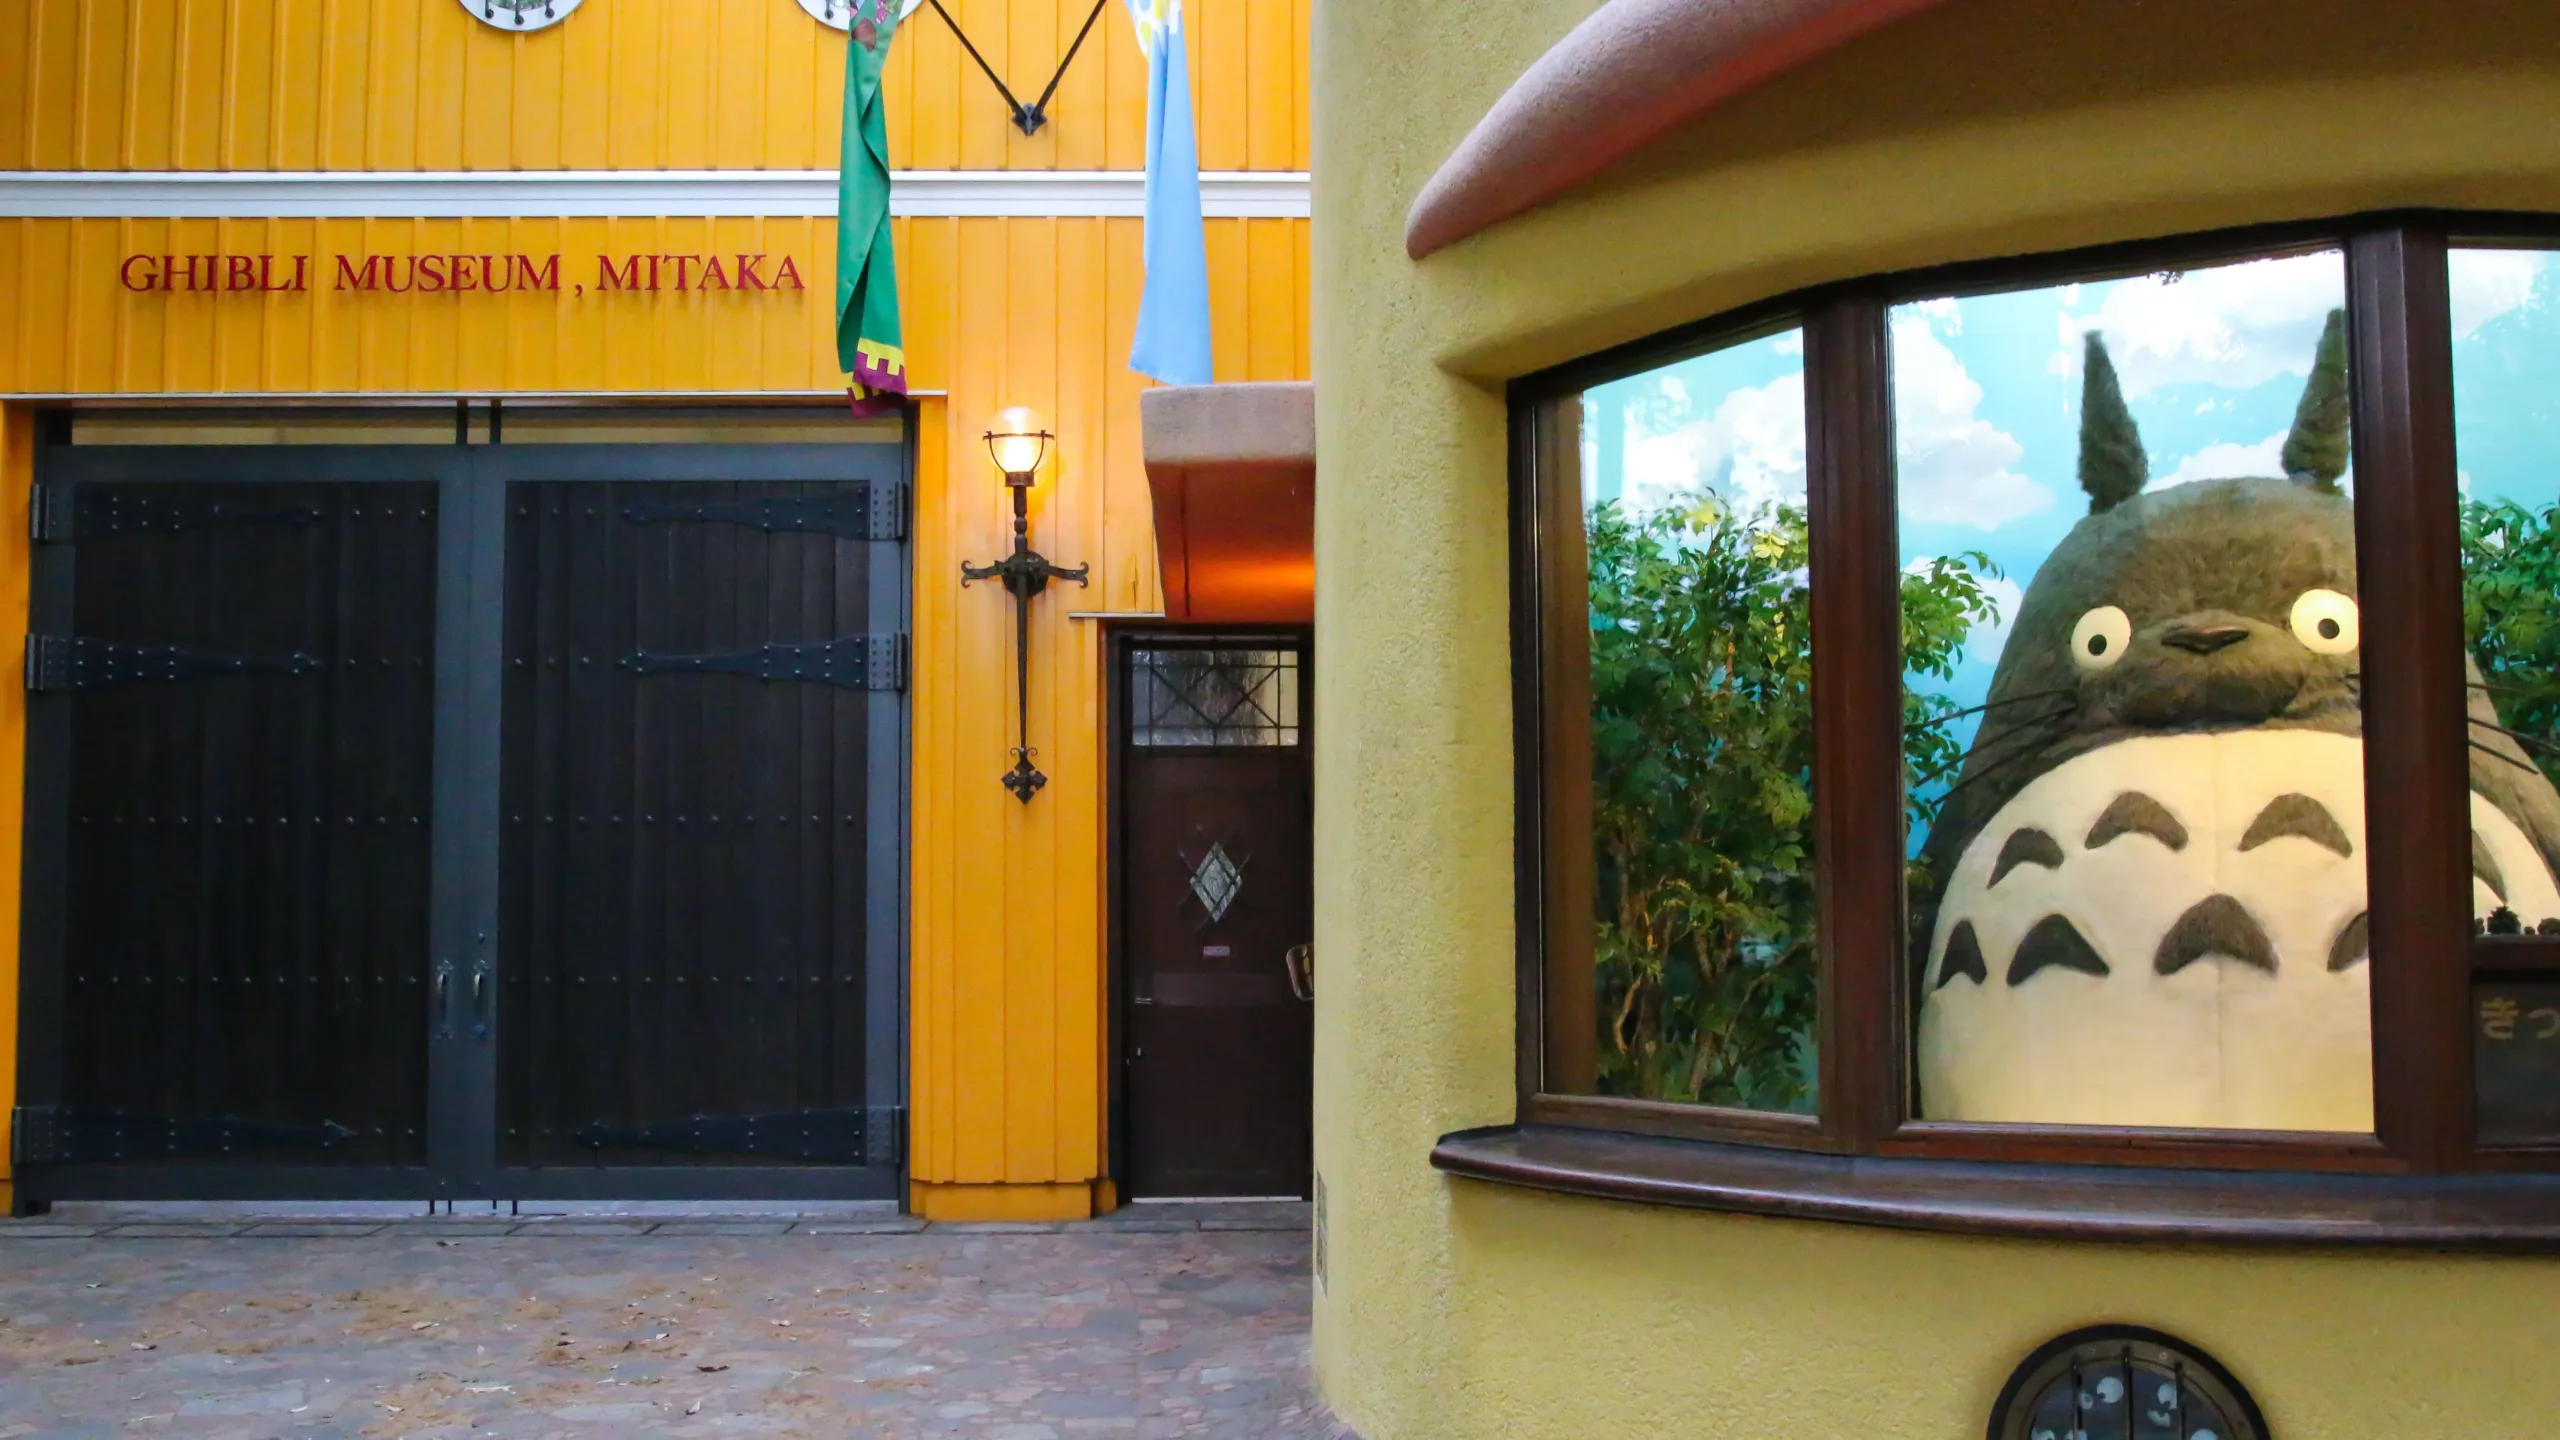 A large Totoro model peeks out of a window at Ghibli Museum Mitaka Entrance